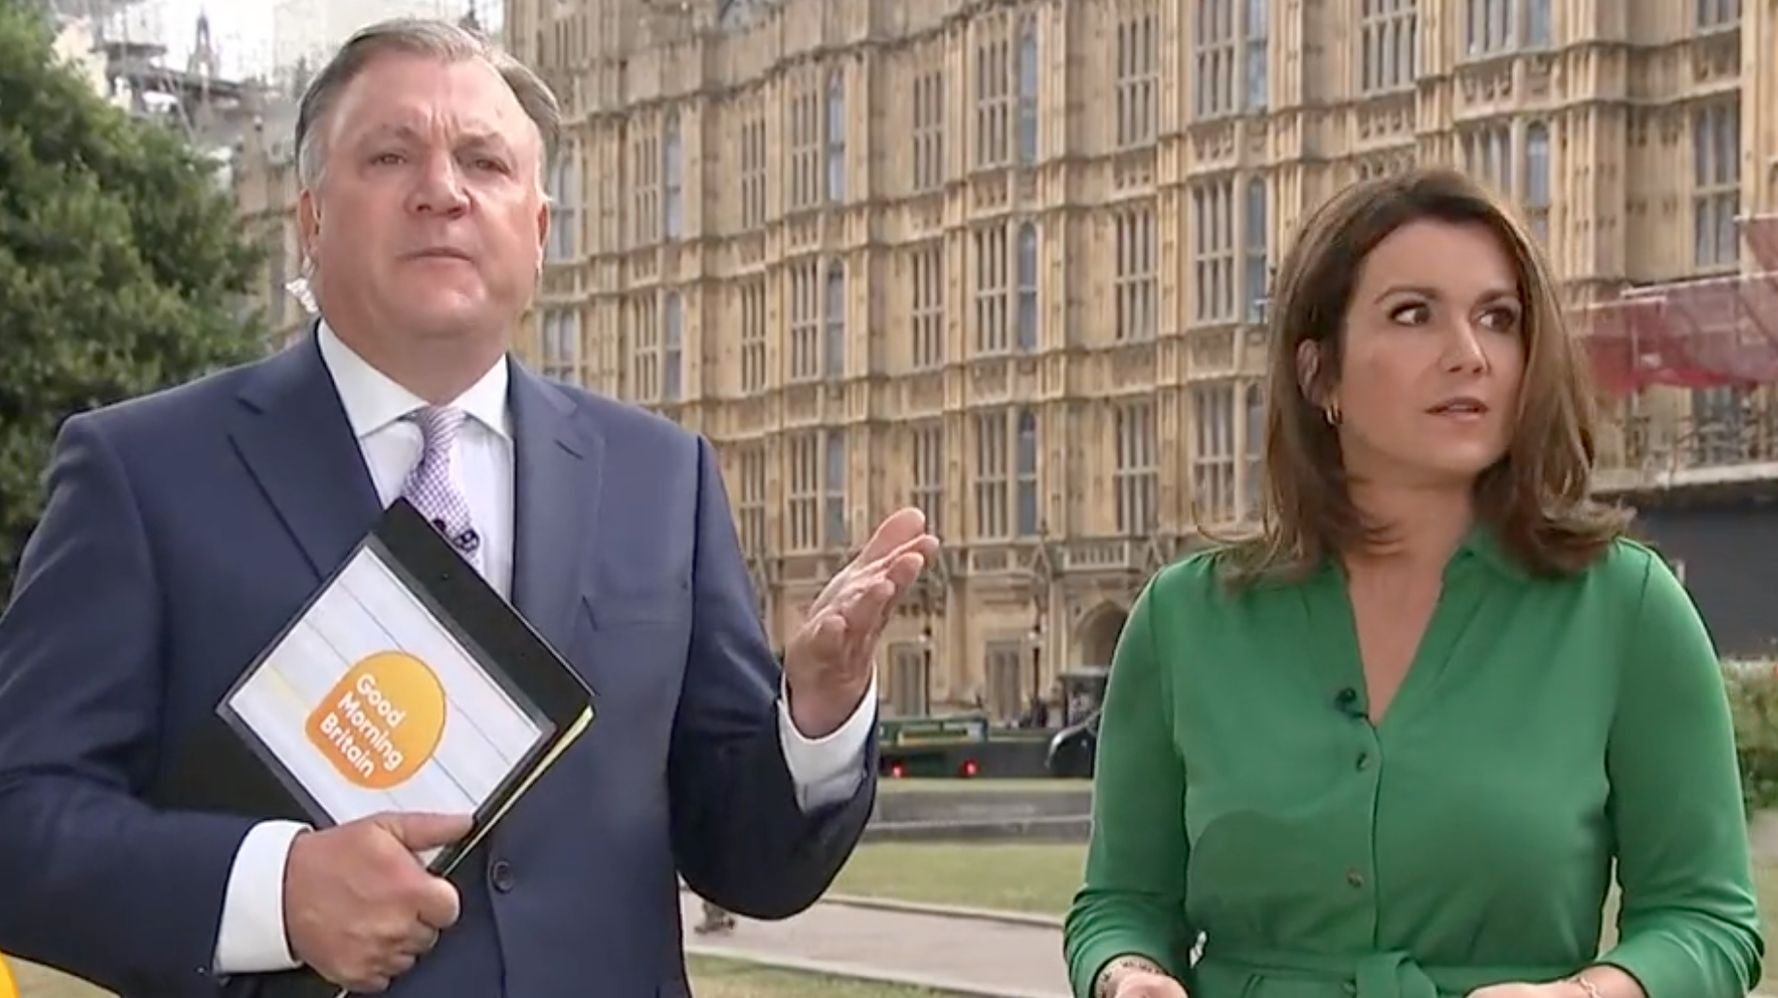 Susanna Reid And Ed Balls' Live Broadcast On Good Morning Britain Disrupted By Musical Protest